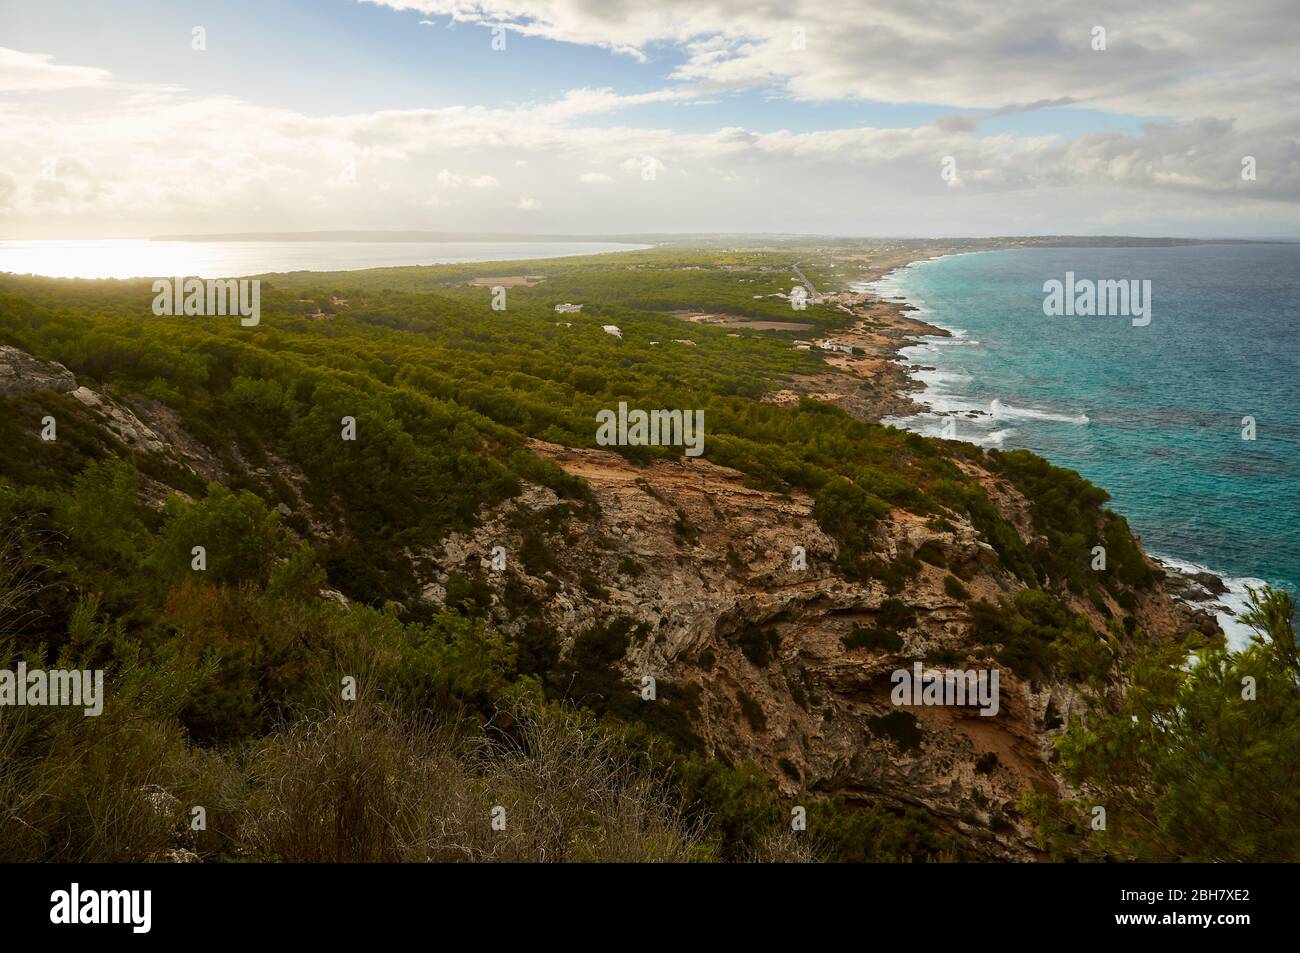 Panoramic view of Formentera central isthmus and coastline from Sa Pujada trail path (Formentera, Balearic Islands, Mediterranean sea, Spain) Stock Photo